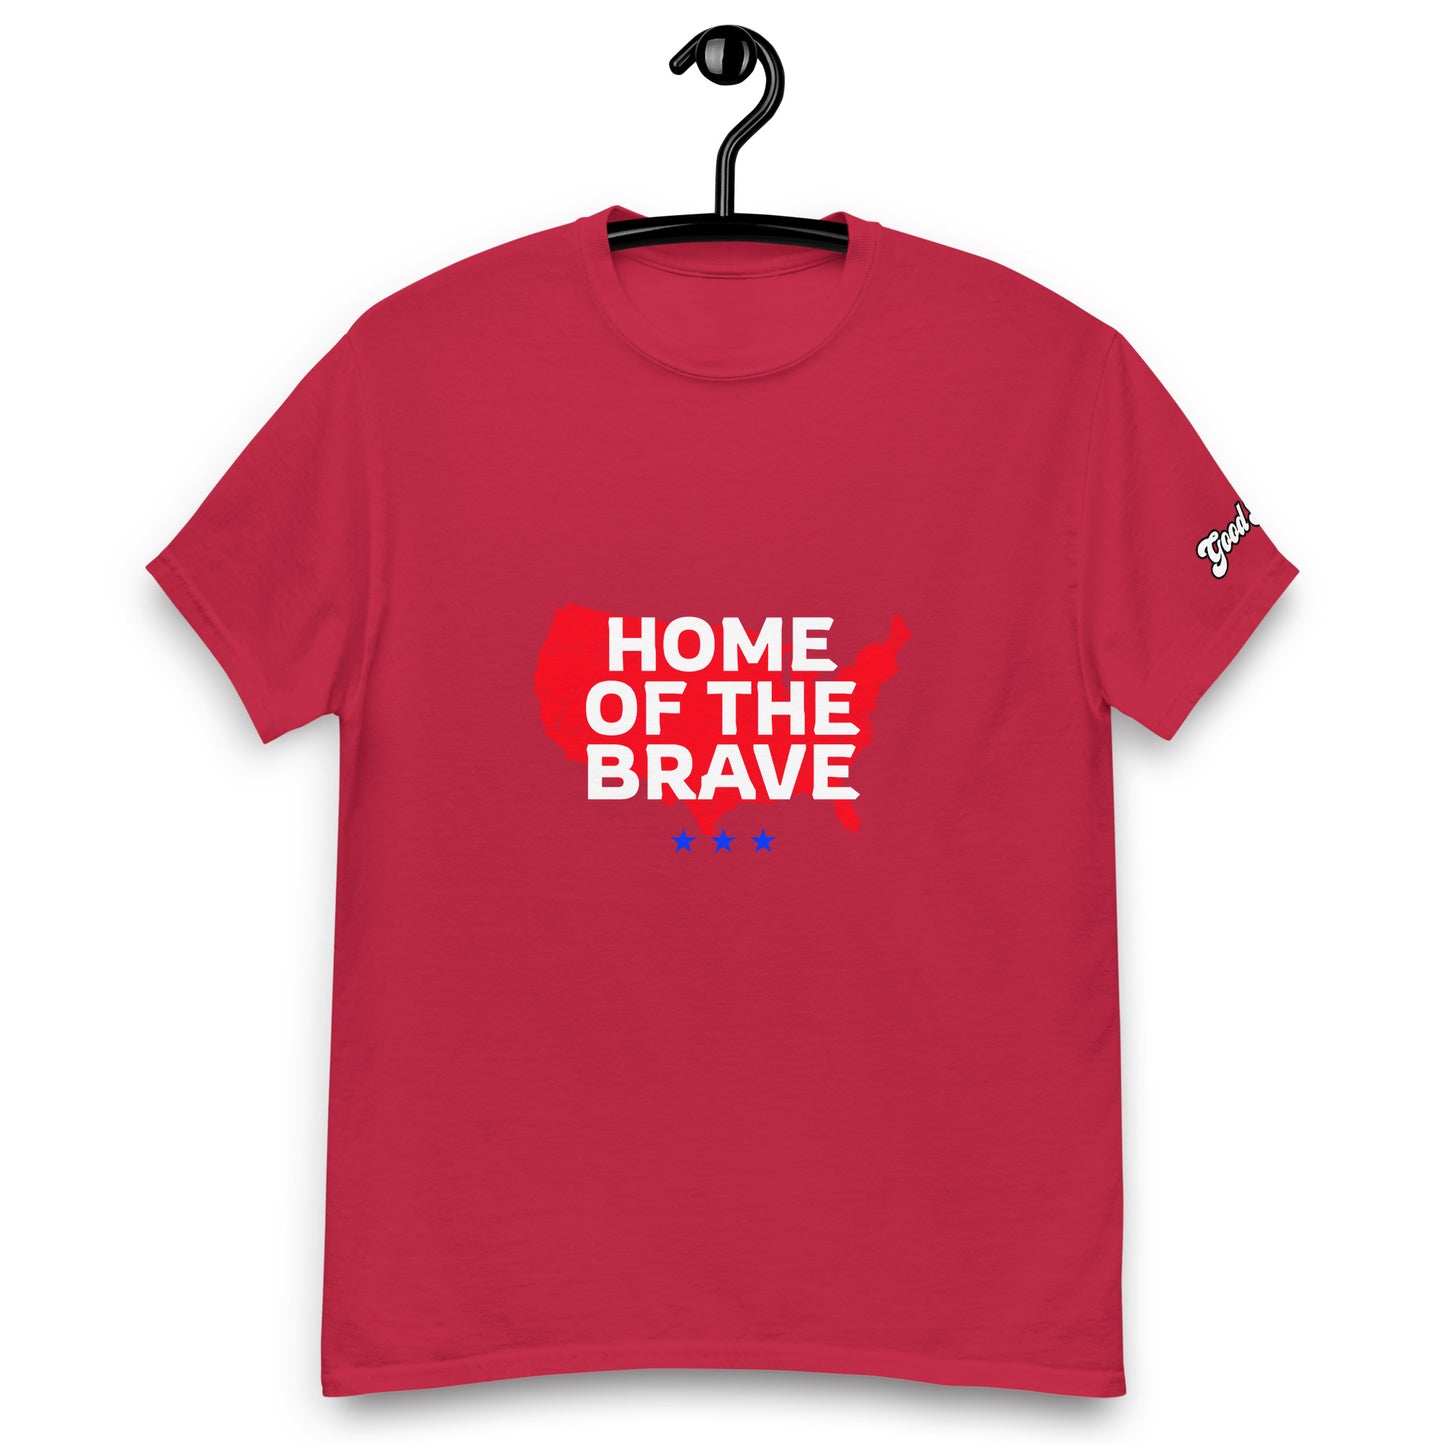 Home Of The Brave T-shirt